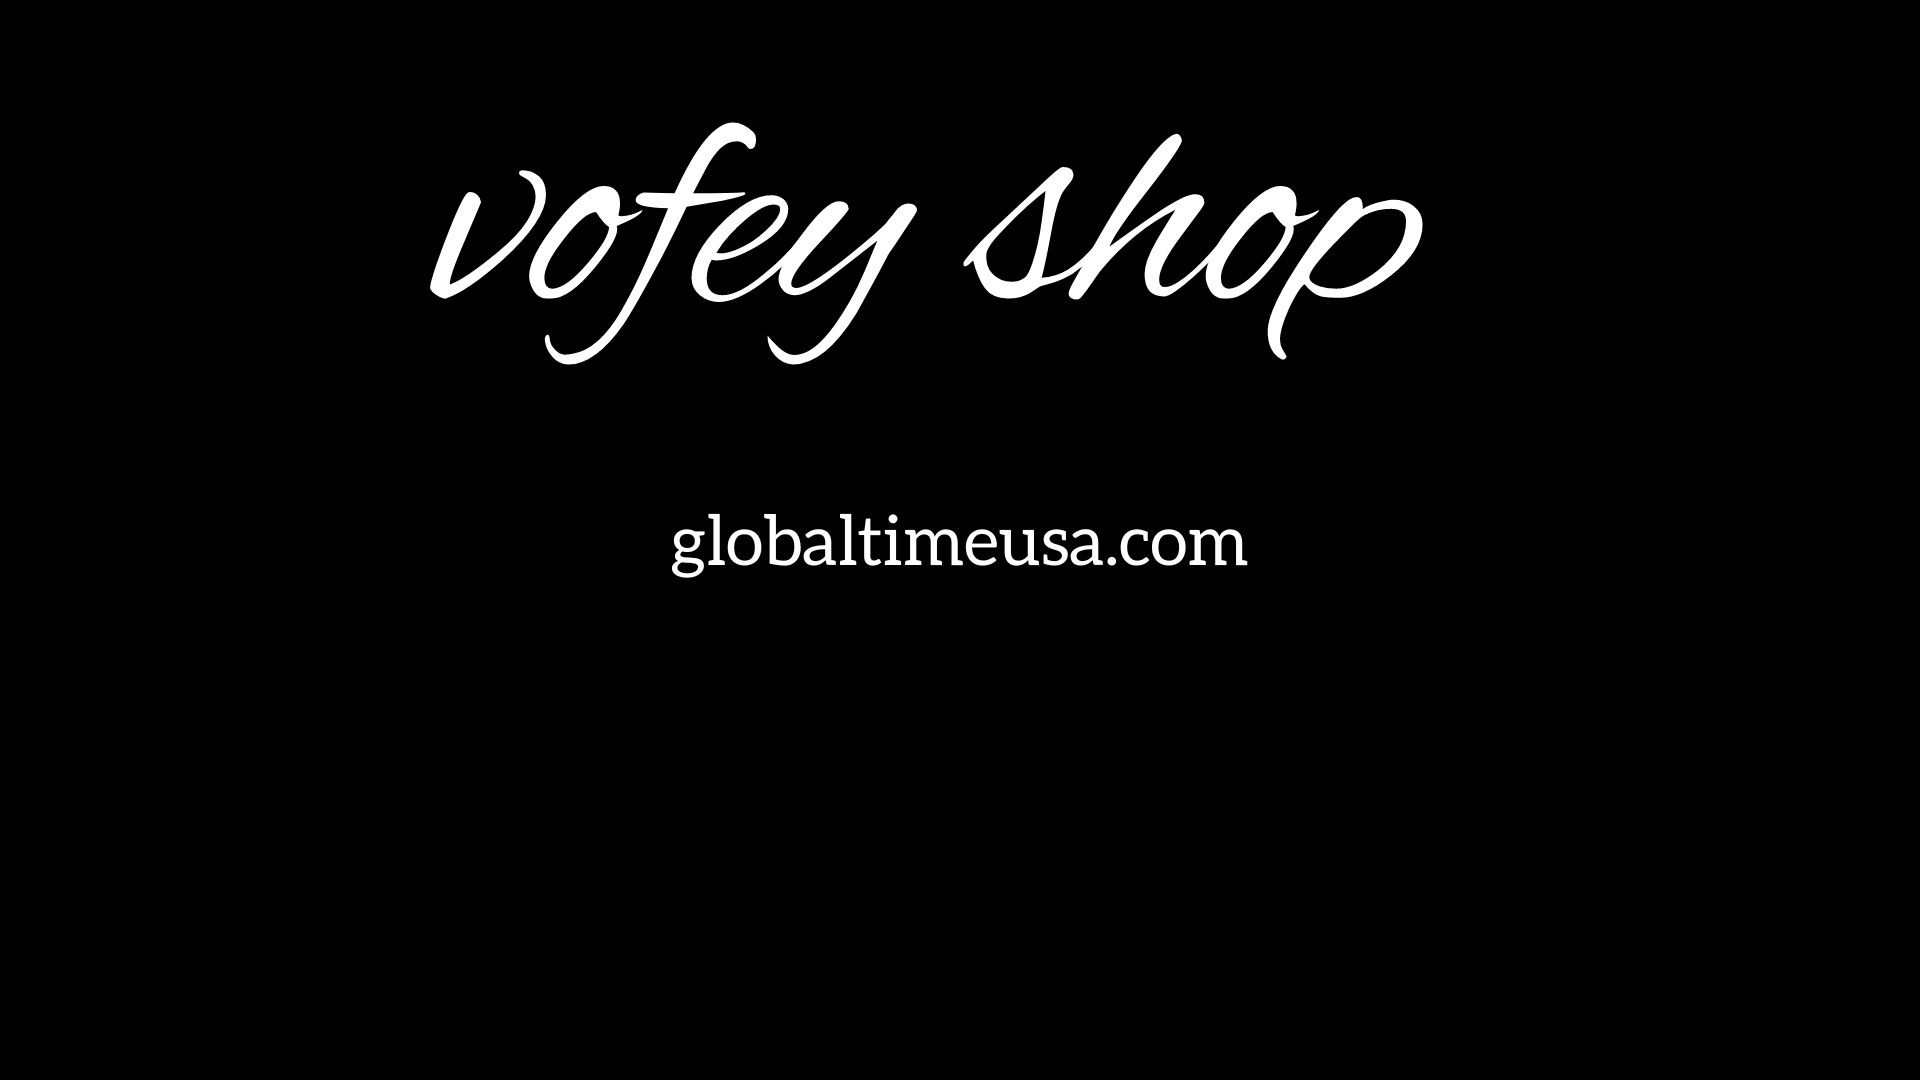 A diverse group of shoppers happily exploring the Vofey Shop Guide, discovering the best deals and saving money on their purchases.